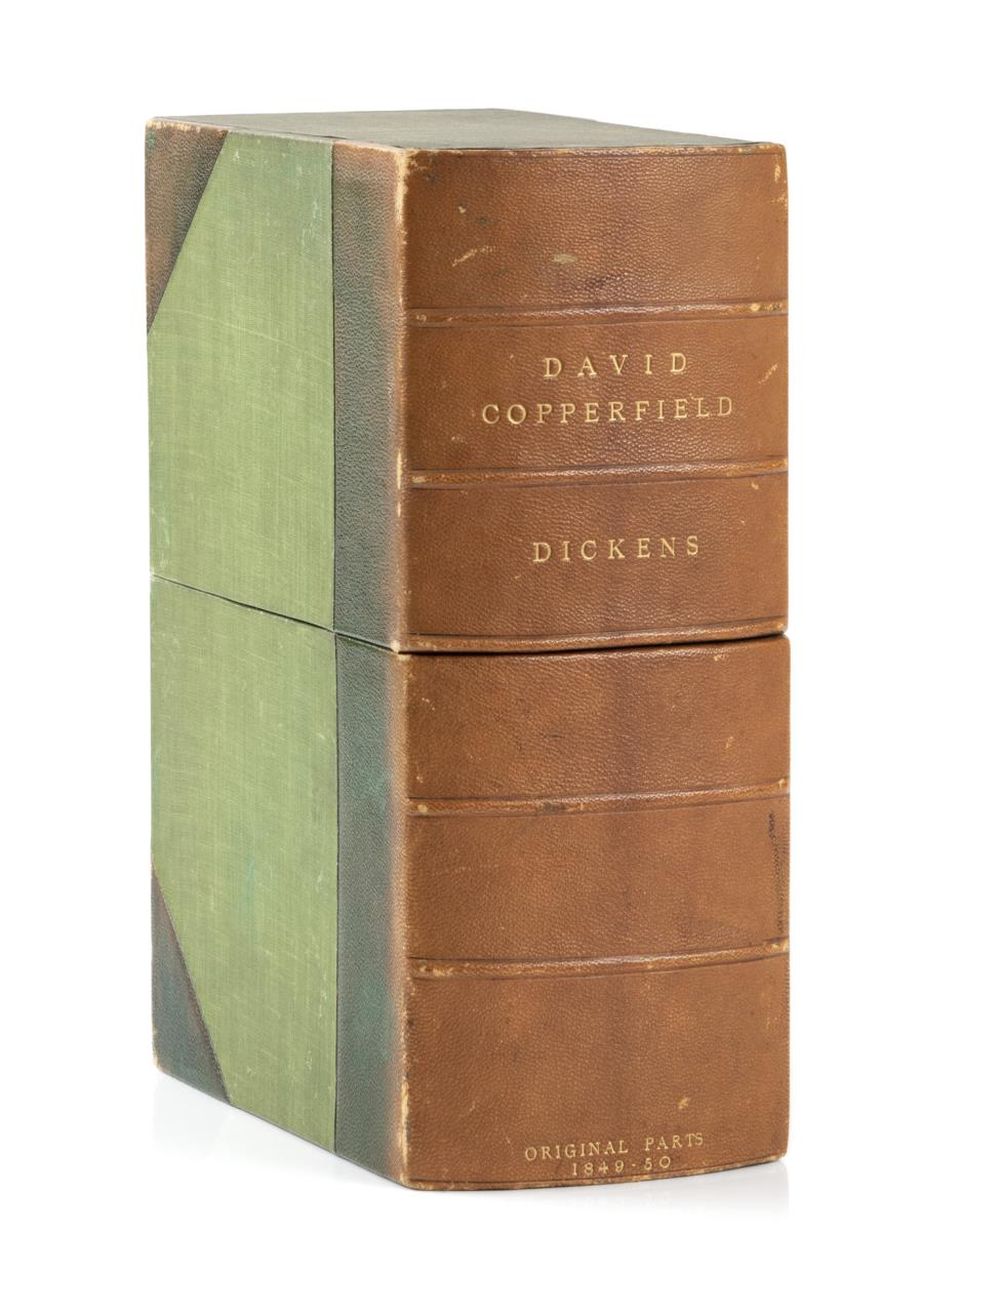 CHARLES DICKENS, DAVID COPPERFIELD,